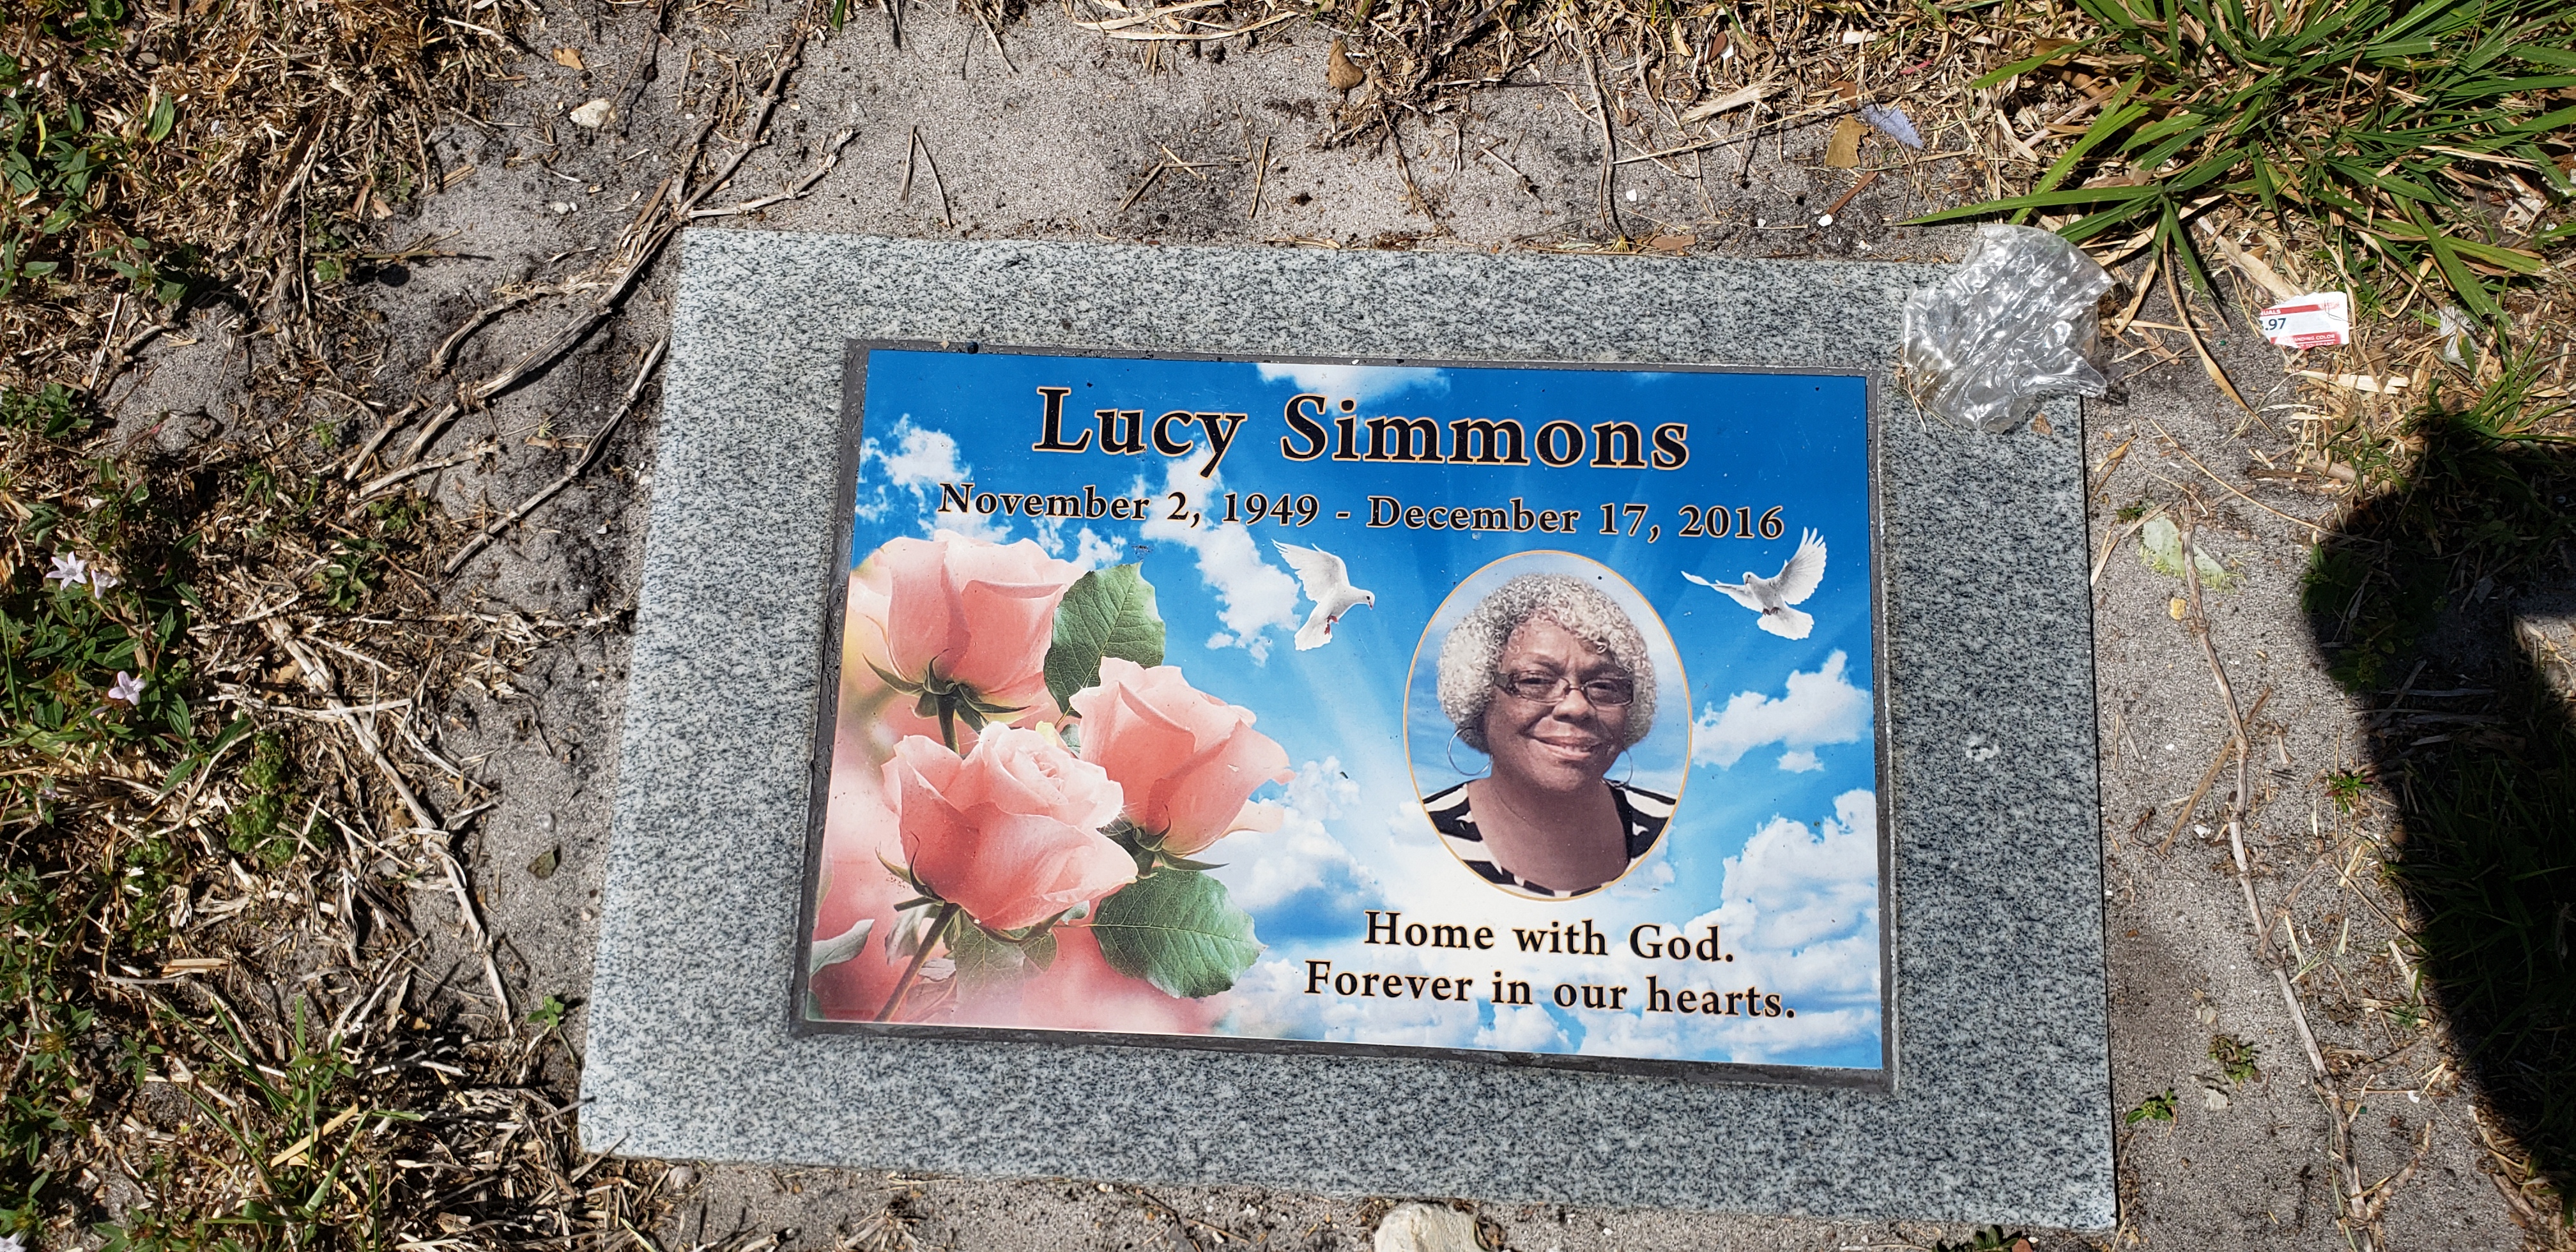 Lucy Simmons